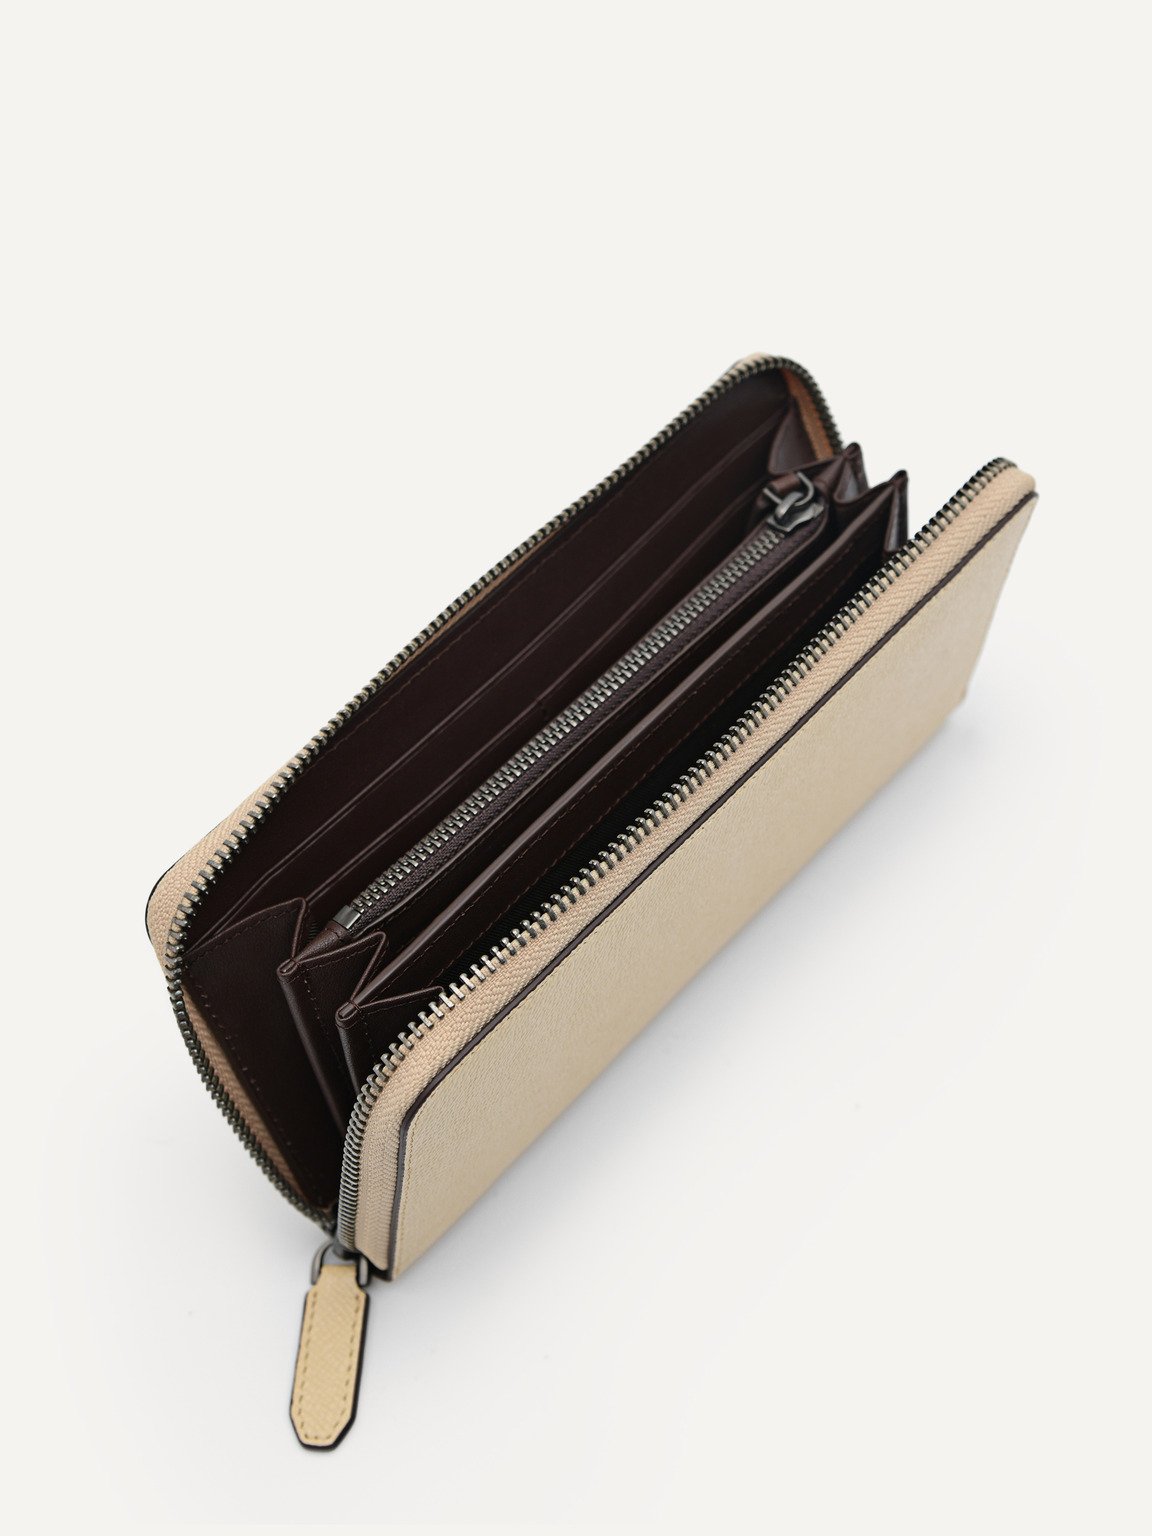 Oliver Long Textured Leather Wallet, Sand